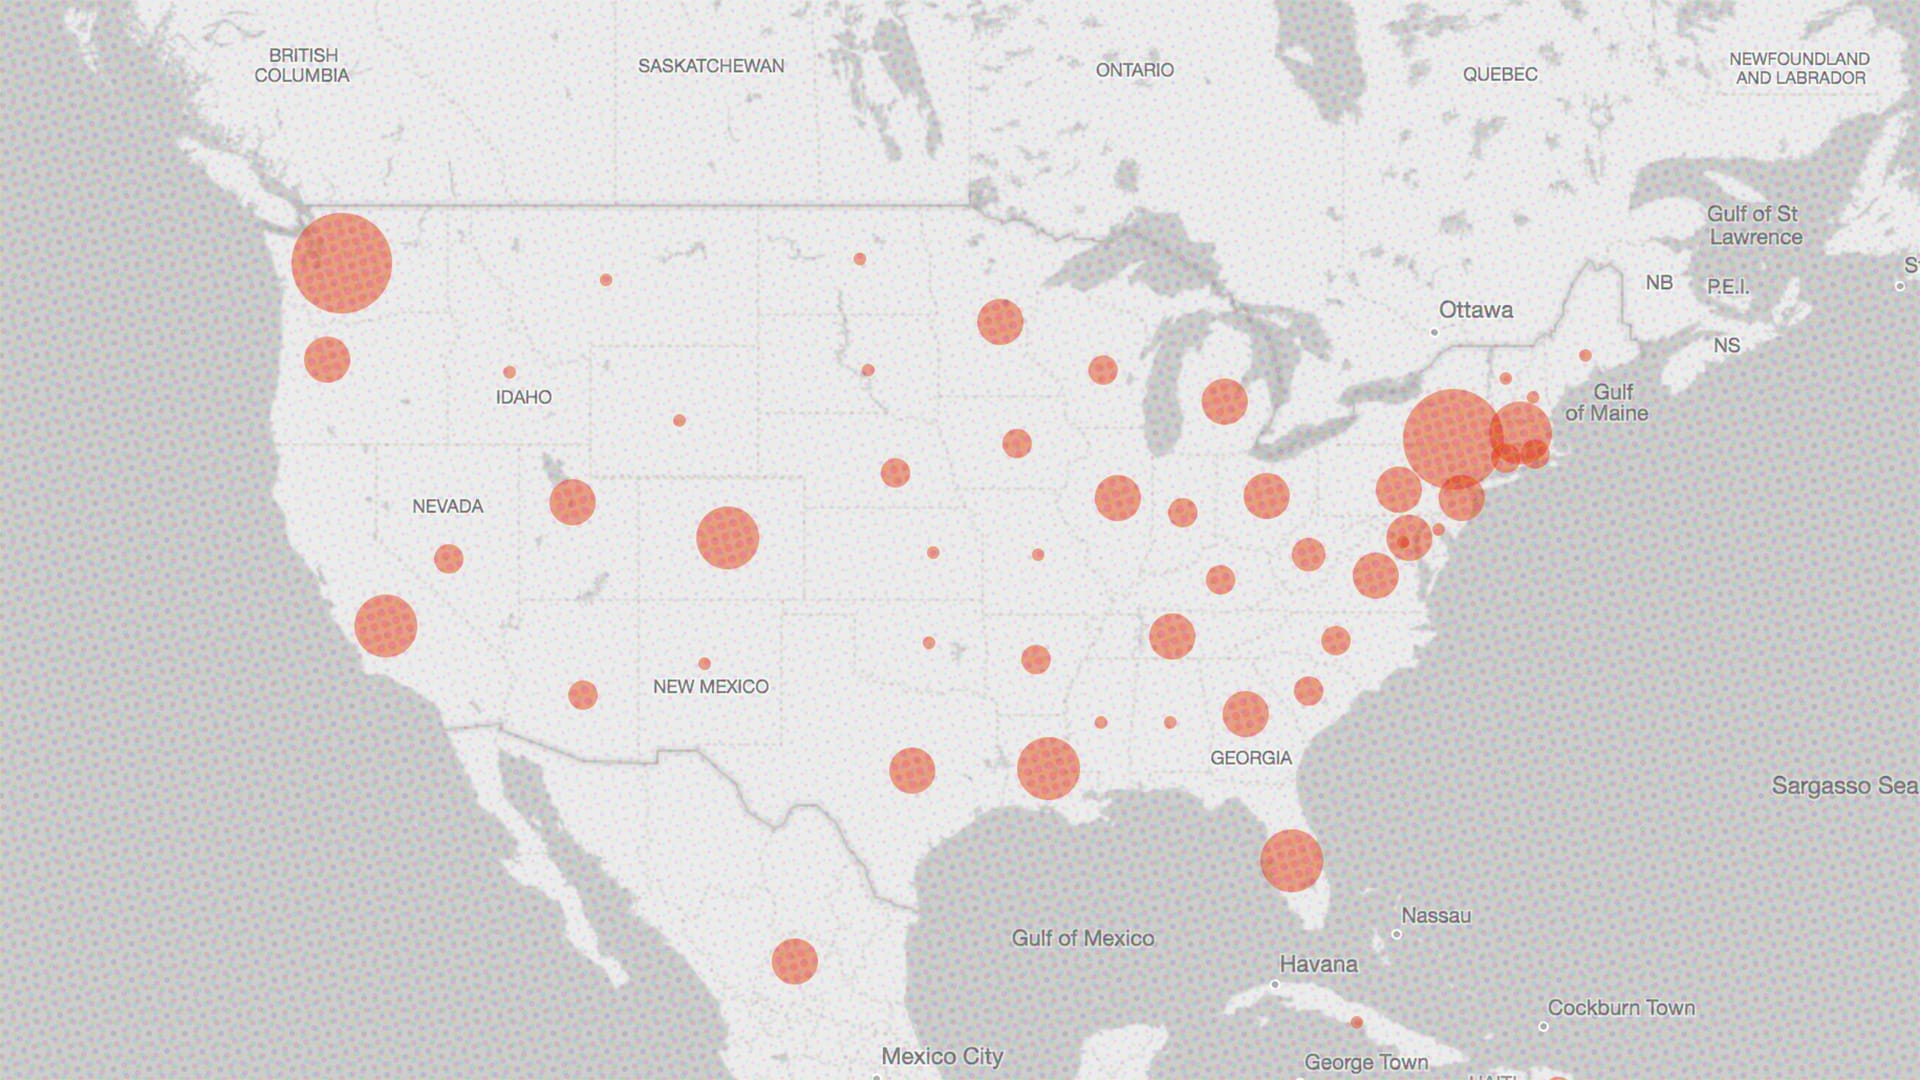 Bing’s coronavirus live map tracks recoveries, along with new cases and deaths